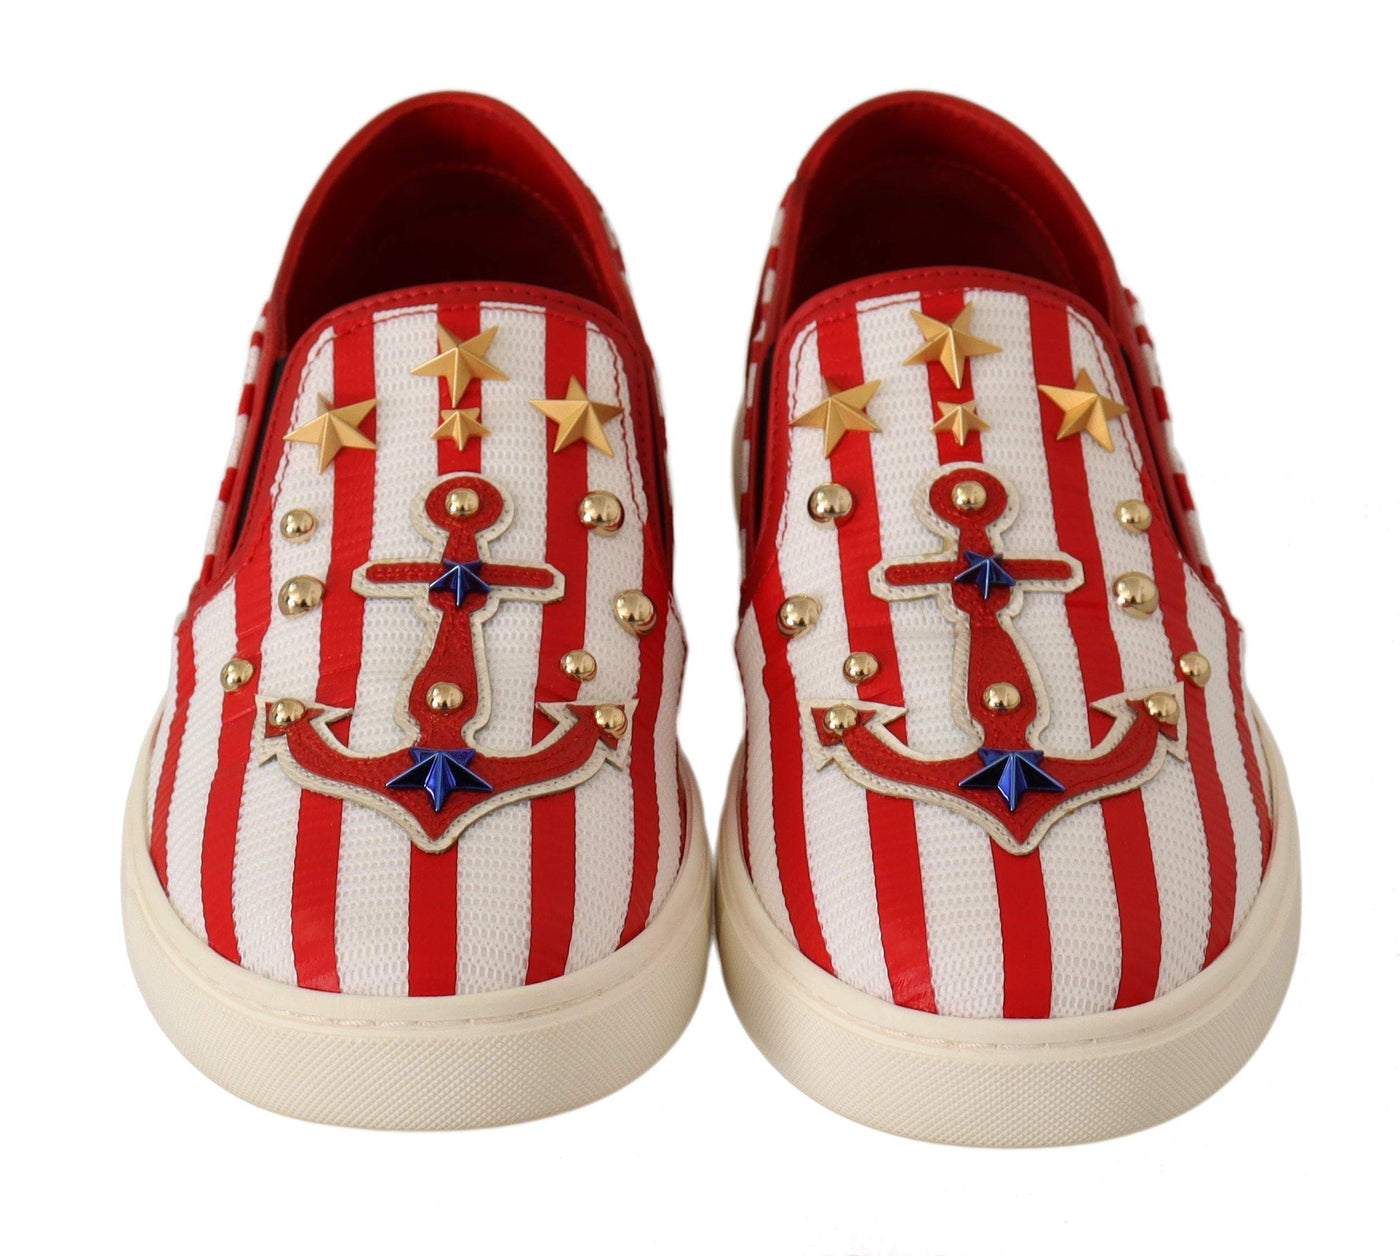 Dolce & Gabbana Red White Anchor Studded Loafers Shoes Dolce & Gabbana, EU36.5/US6, EU36/US5.5, EU38/US7.5, feed-agegroup-adult, feed-color-White, feed-gender-female, Flat Shoes - Women - Shoes, White at SEYMAYKA